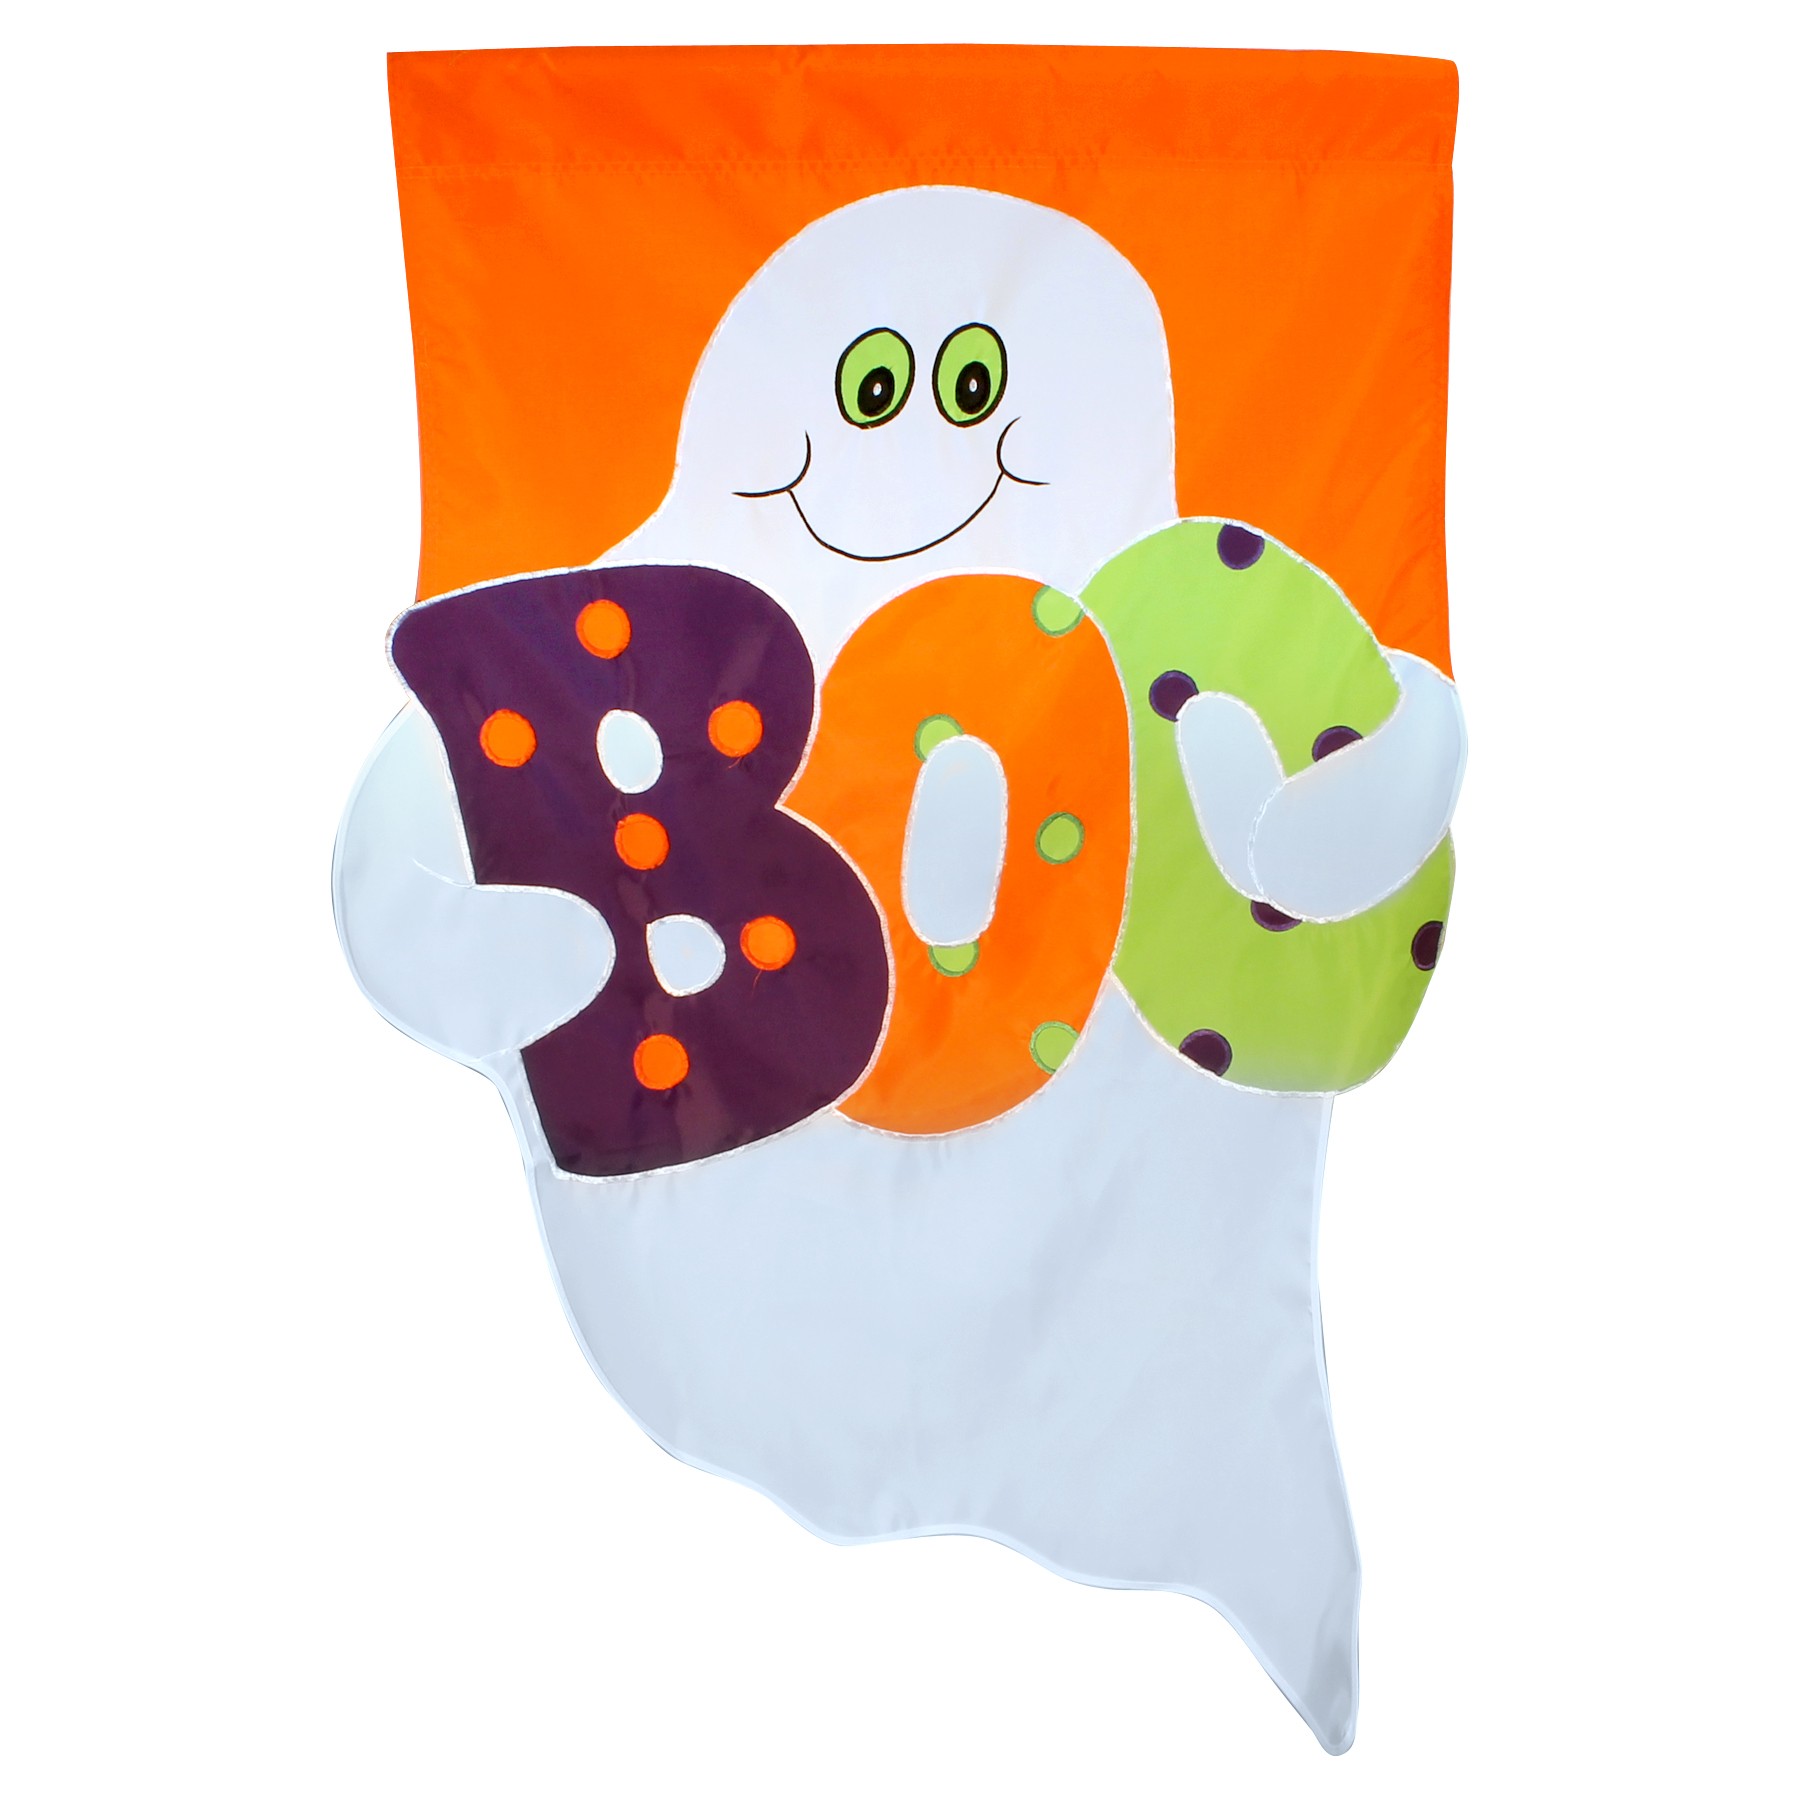 Monster Inc Boo Clipart   Cliparthut   Free Clipart